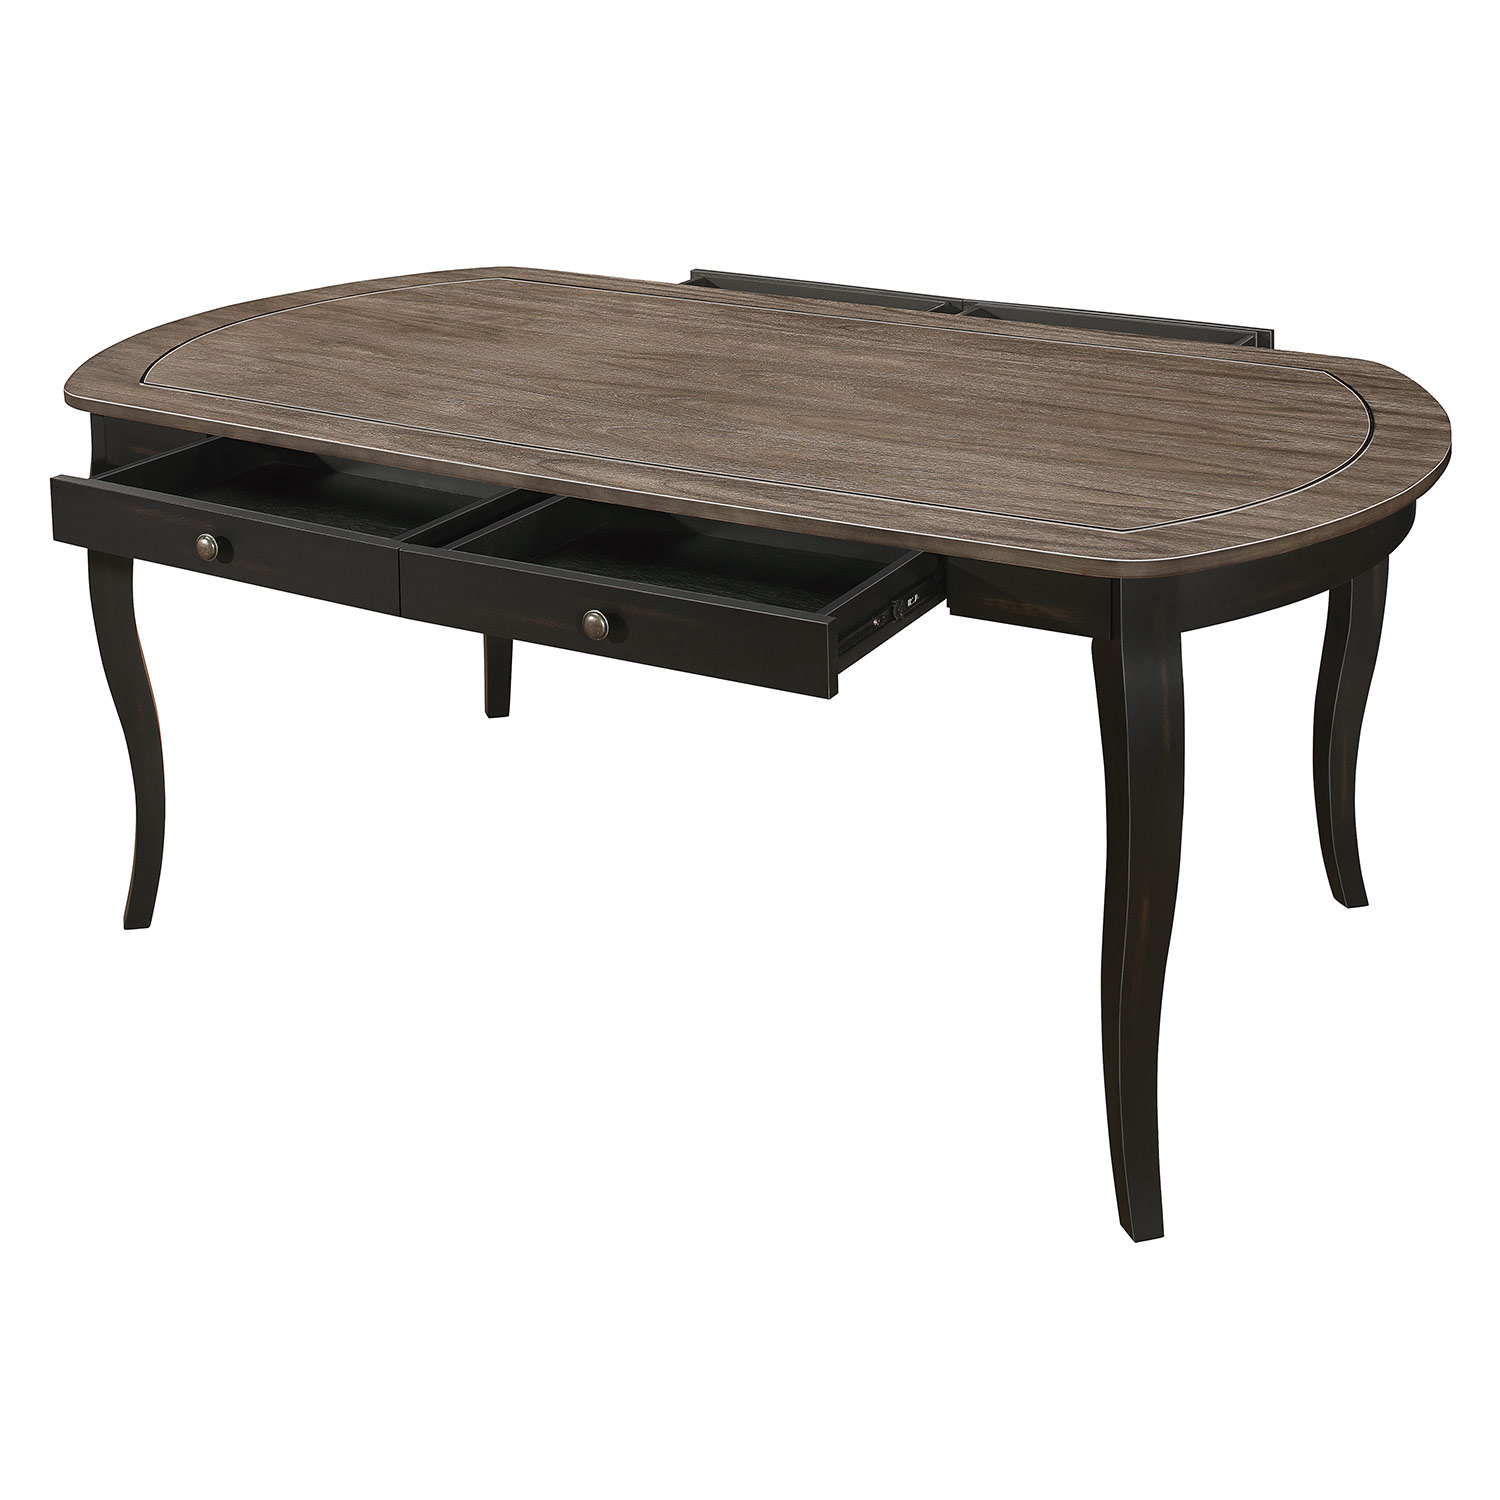 Homelegance Coring Dining Table - Antique 2-Tone